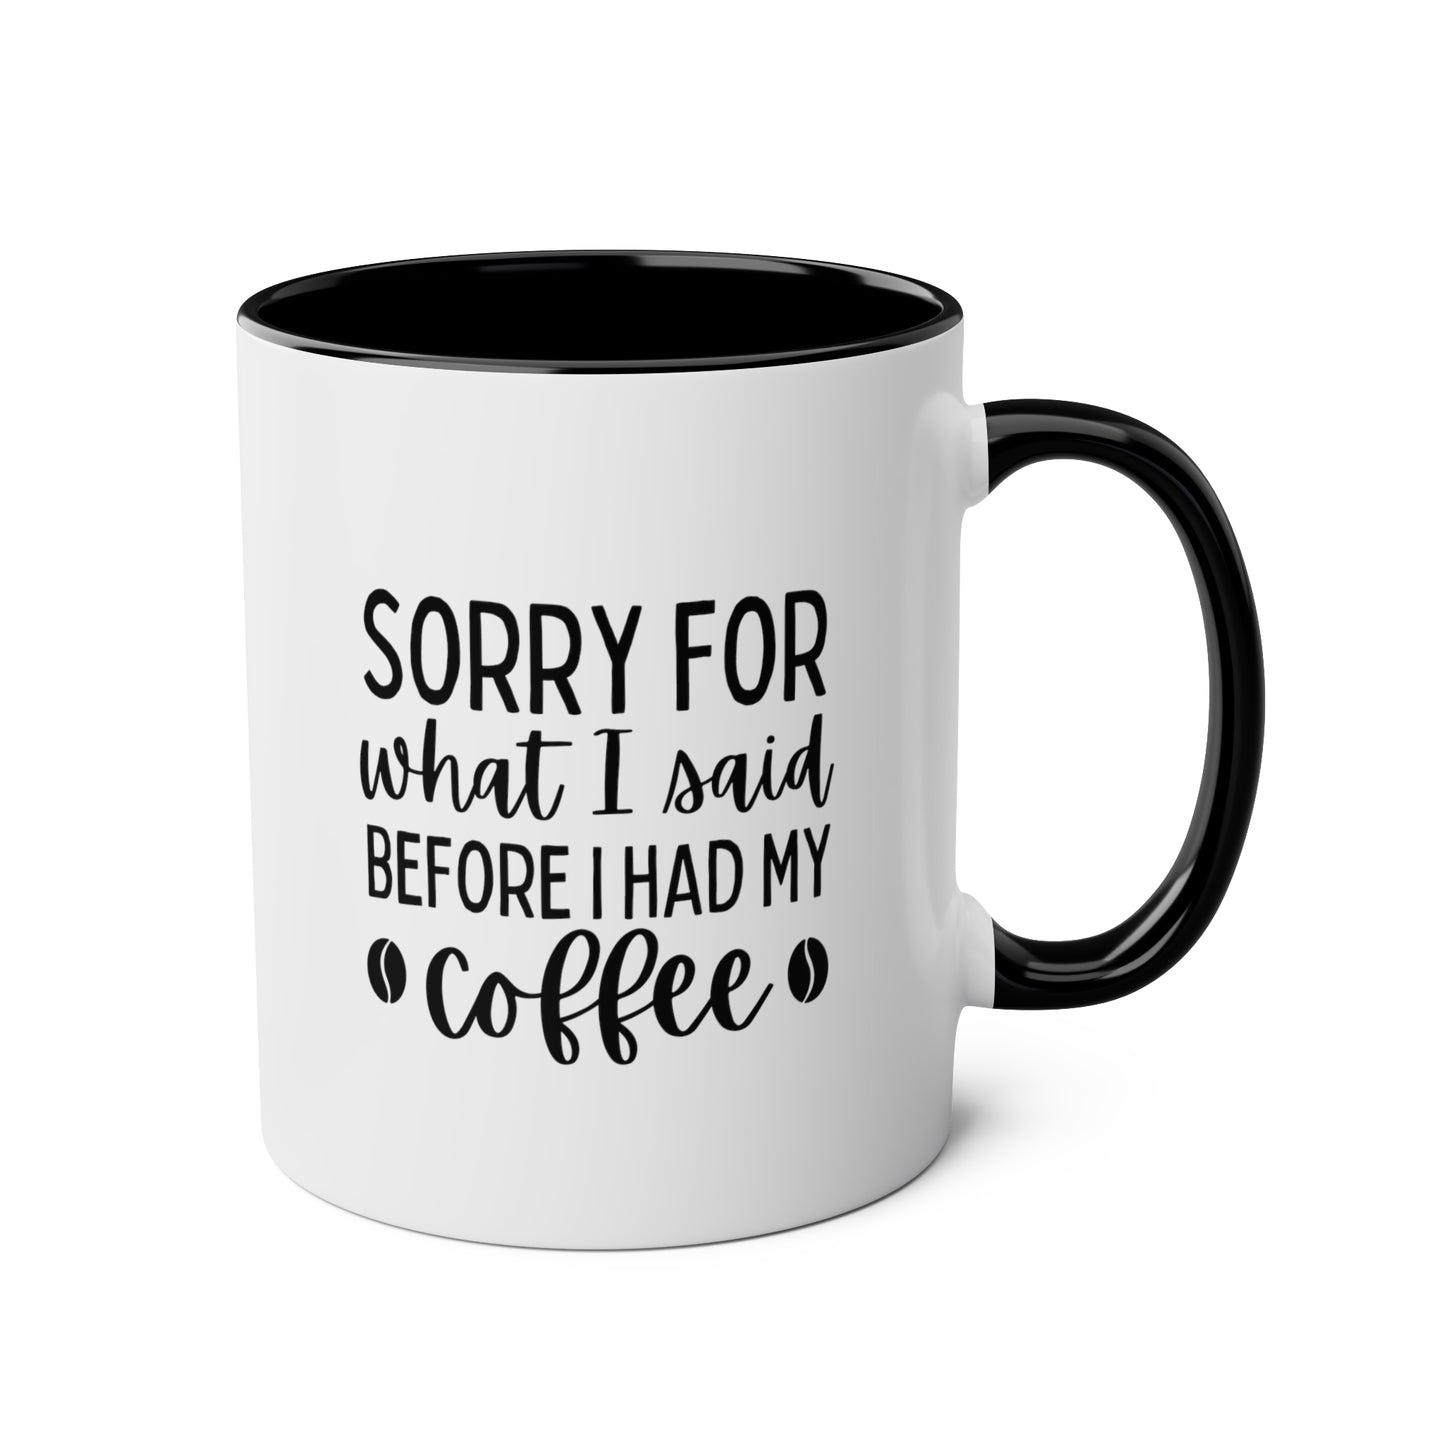 Sorry For What I Said Before I Had My Coffee 11oz white with black accent funny large coffee mug gift for friends family coffee lover fun present waveywares wavey wares wavywares wavy wares